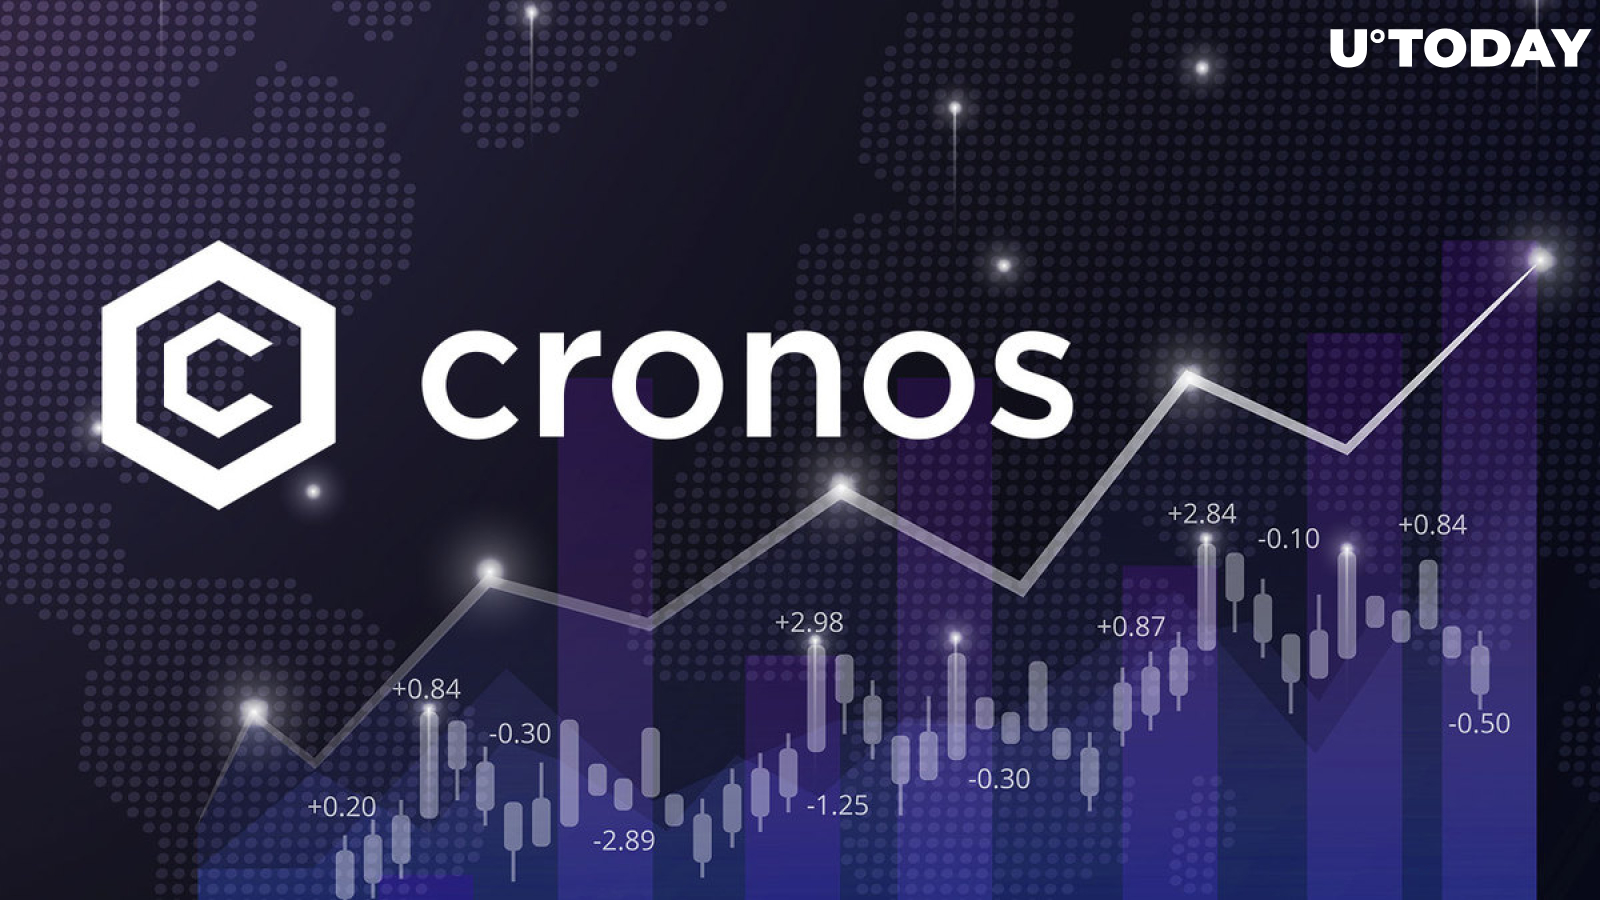 Cronos (CRO) up 15%, Here Are 3 Key Factors Pushing This Leap